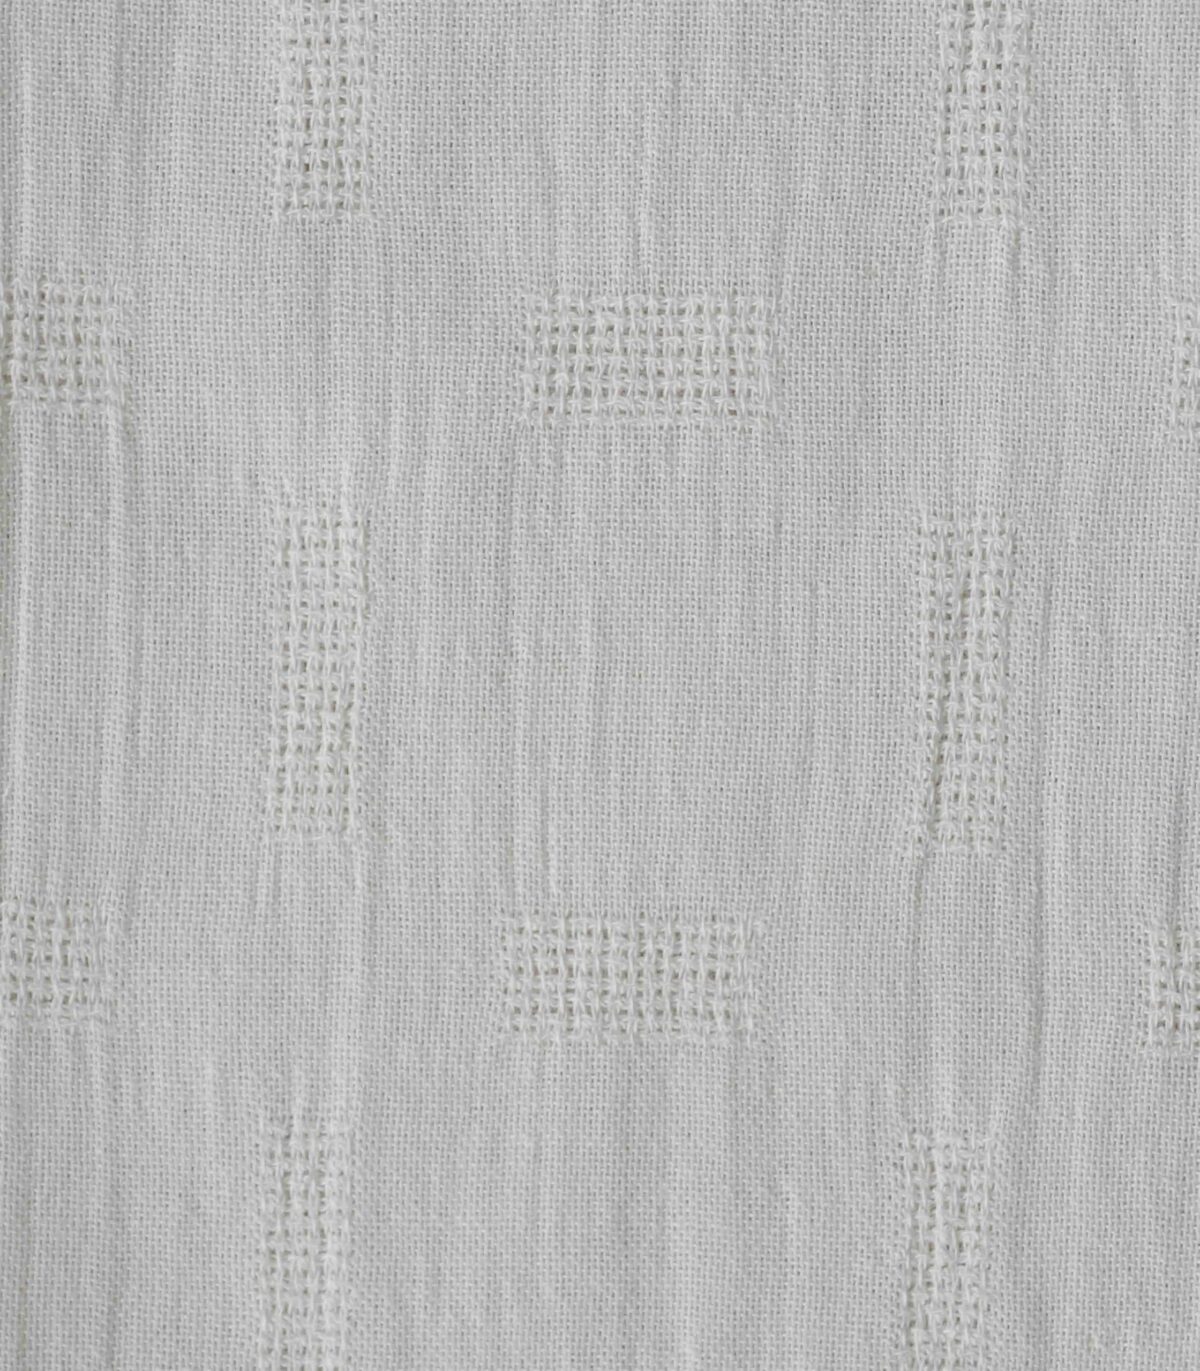 Dobby Cotton RFD Woven Fabric